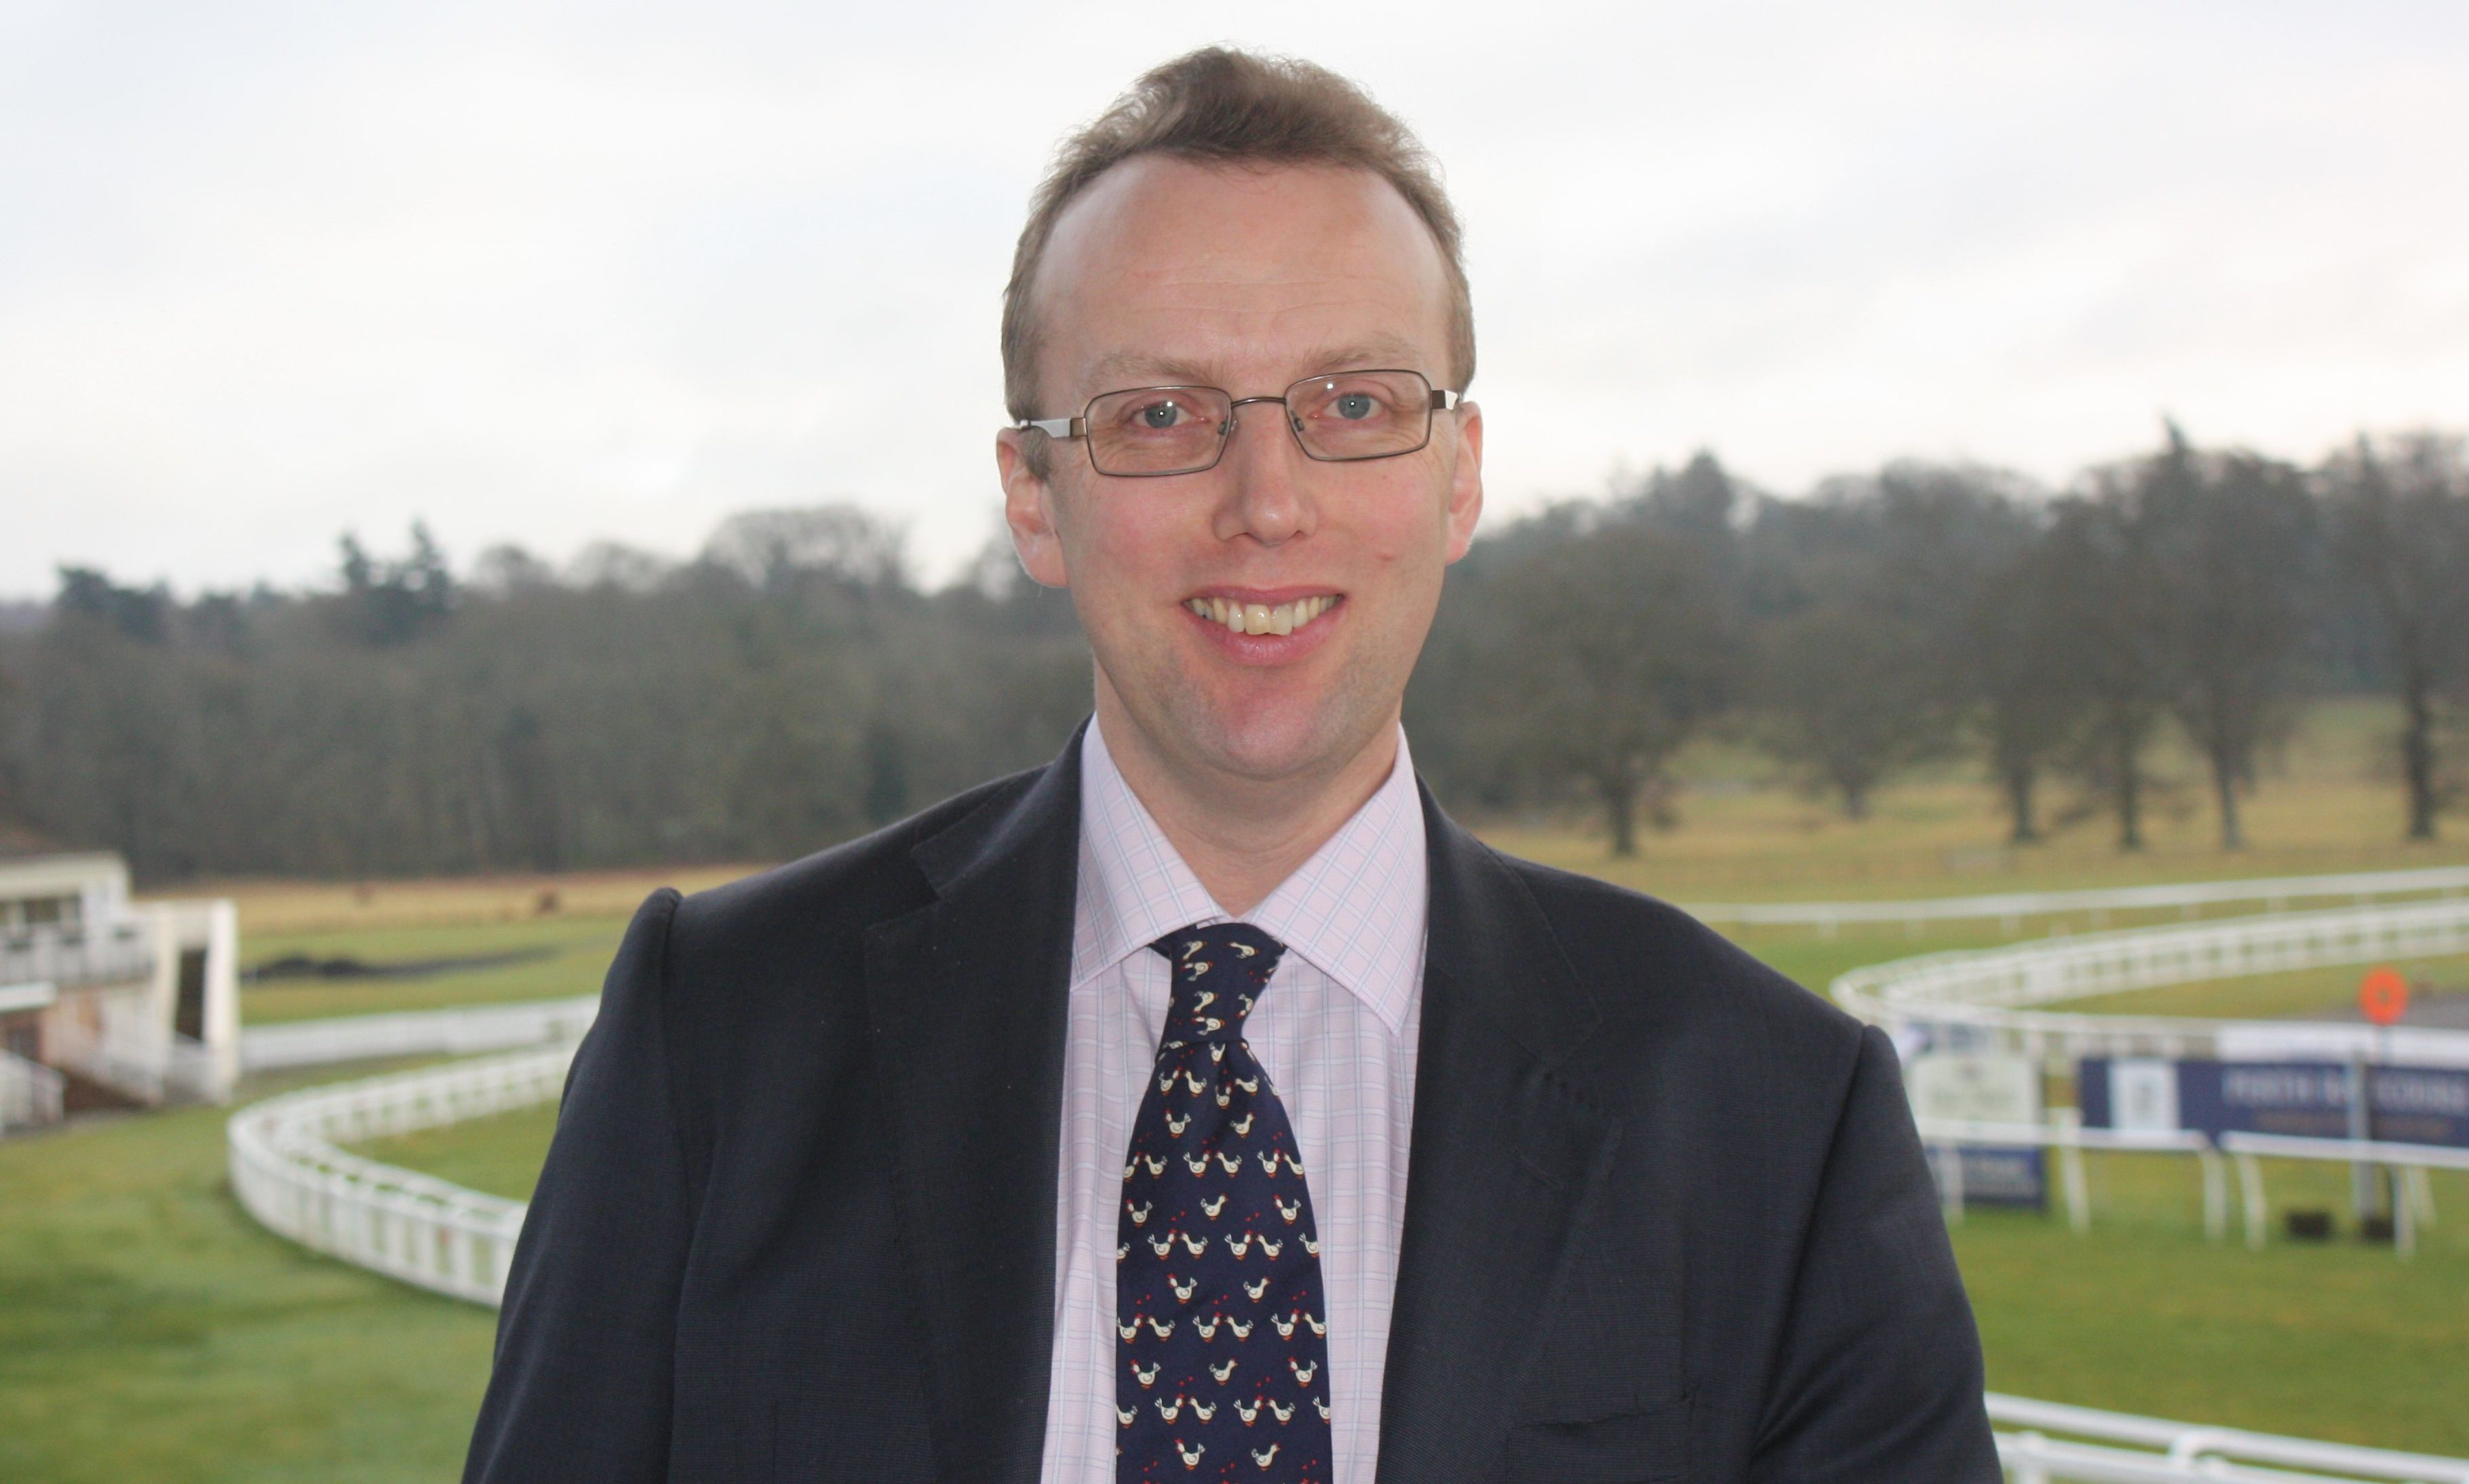 Julian Bell encouraged arable farmers to explore local markets during his address at Agronomy 2017 Scotland) at Perth Racecourse